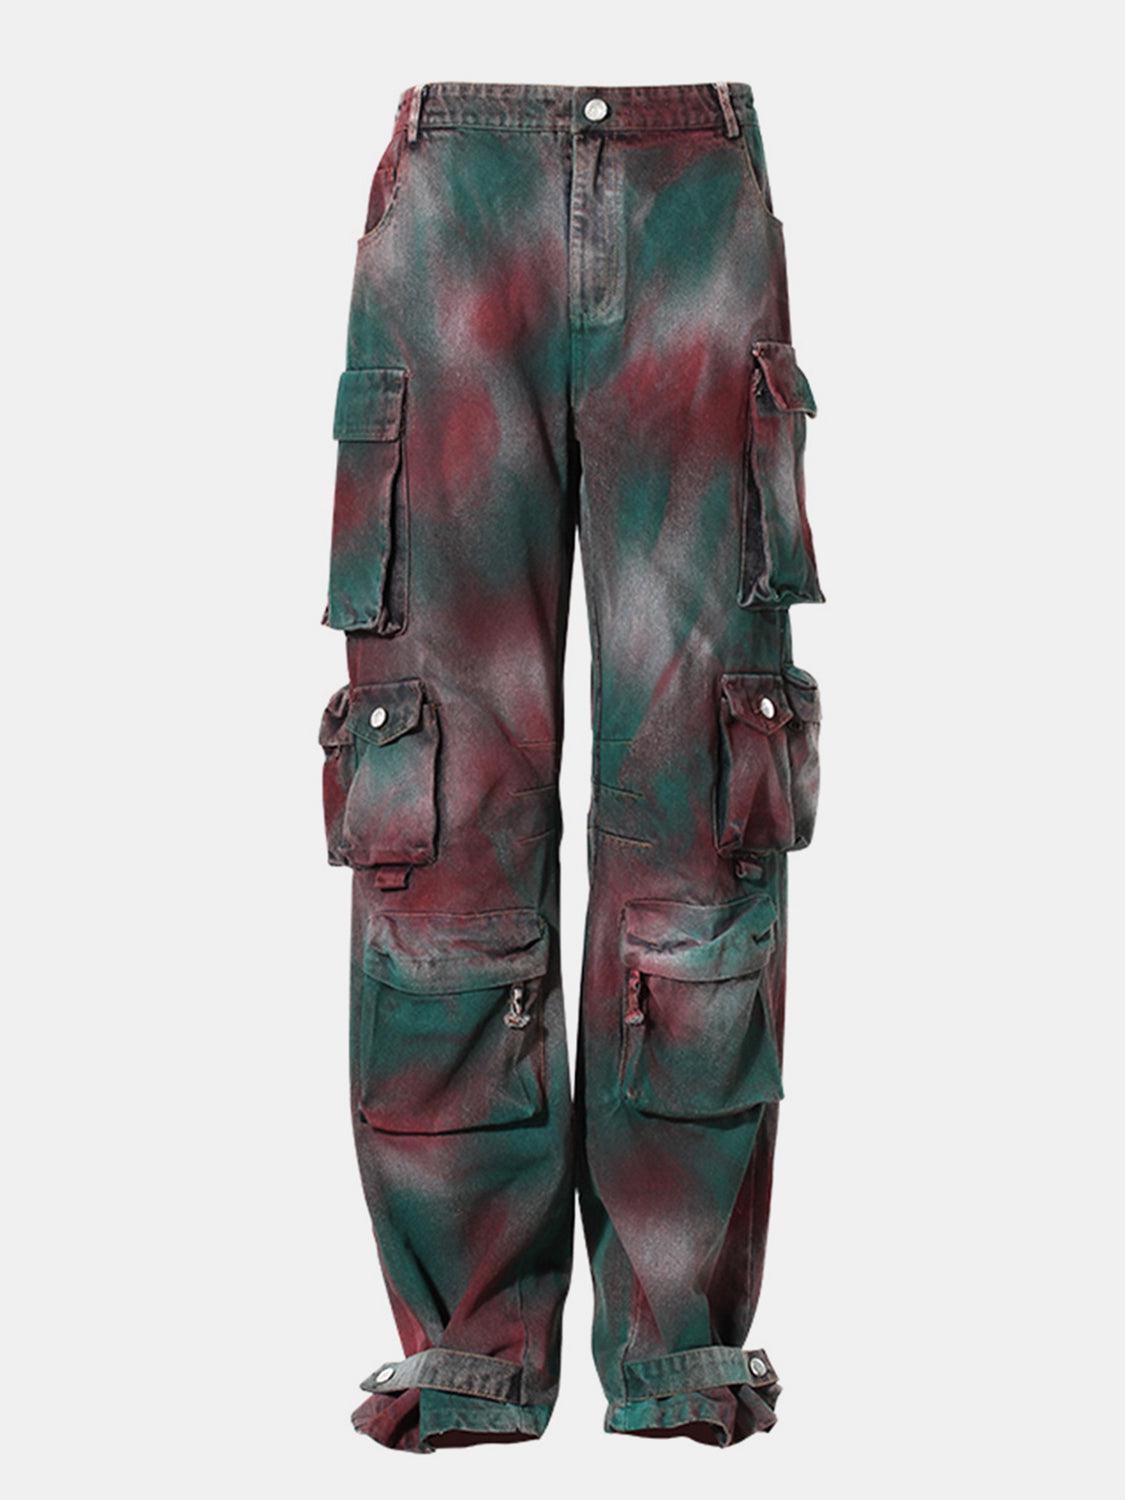 a pair of green and red cargo pants